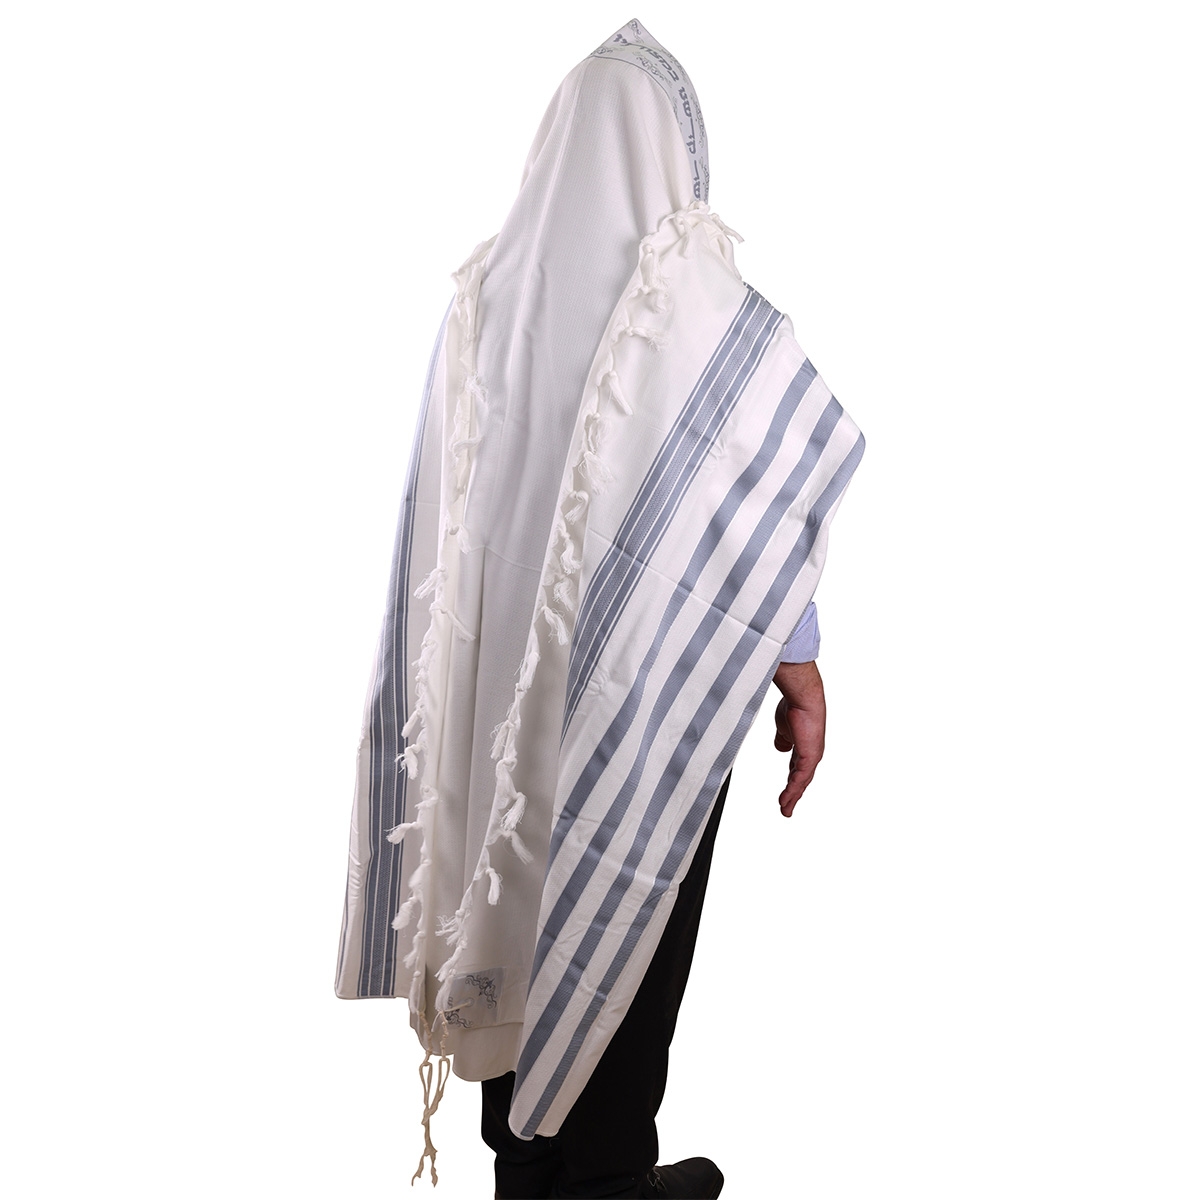 100% Cotton Prayer Shawl with Gray Stripes, Religious Articles